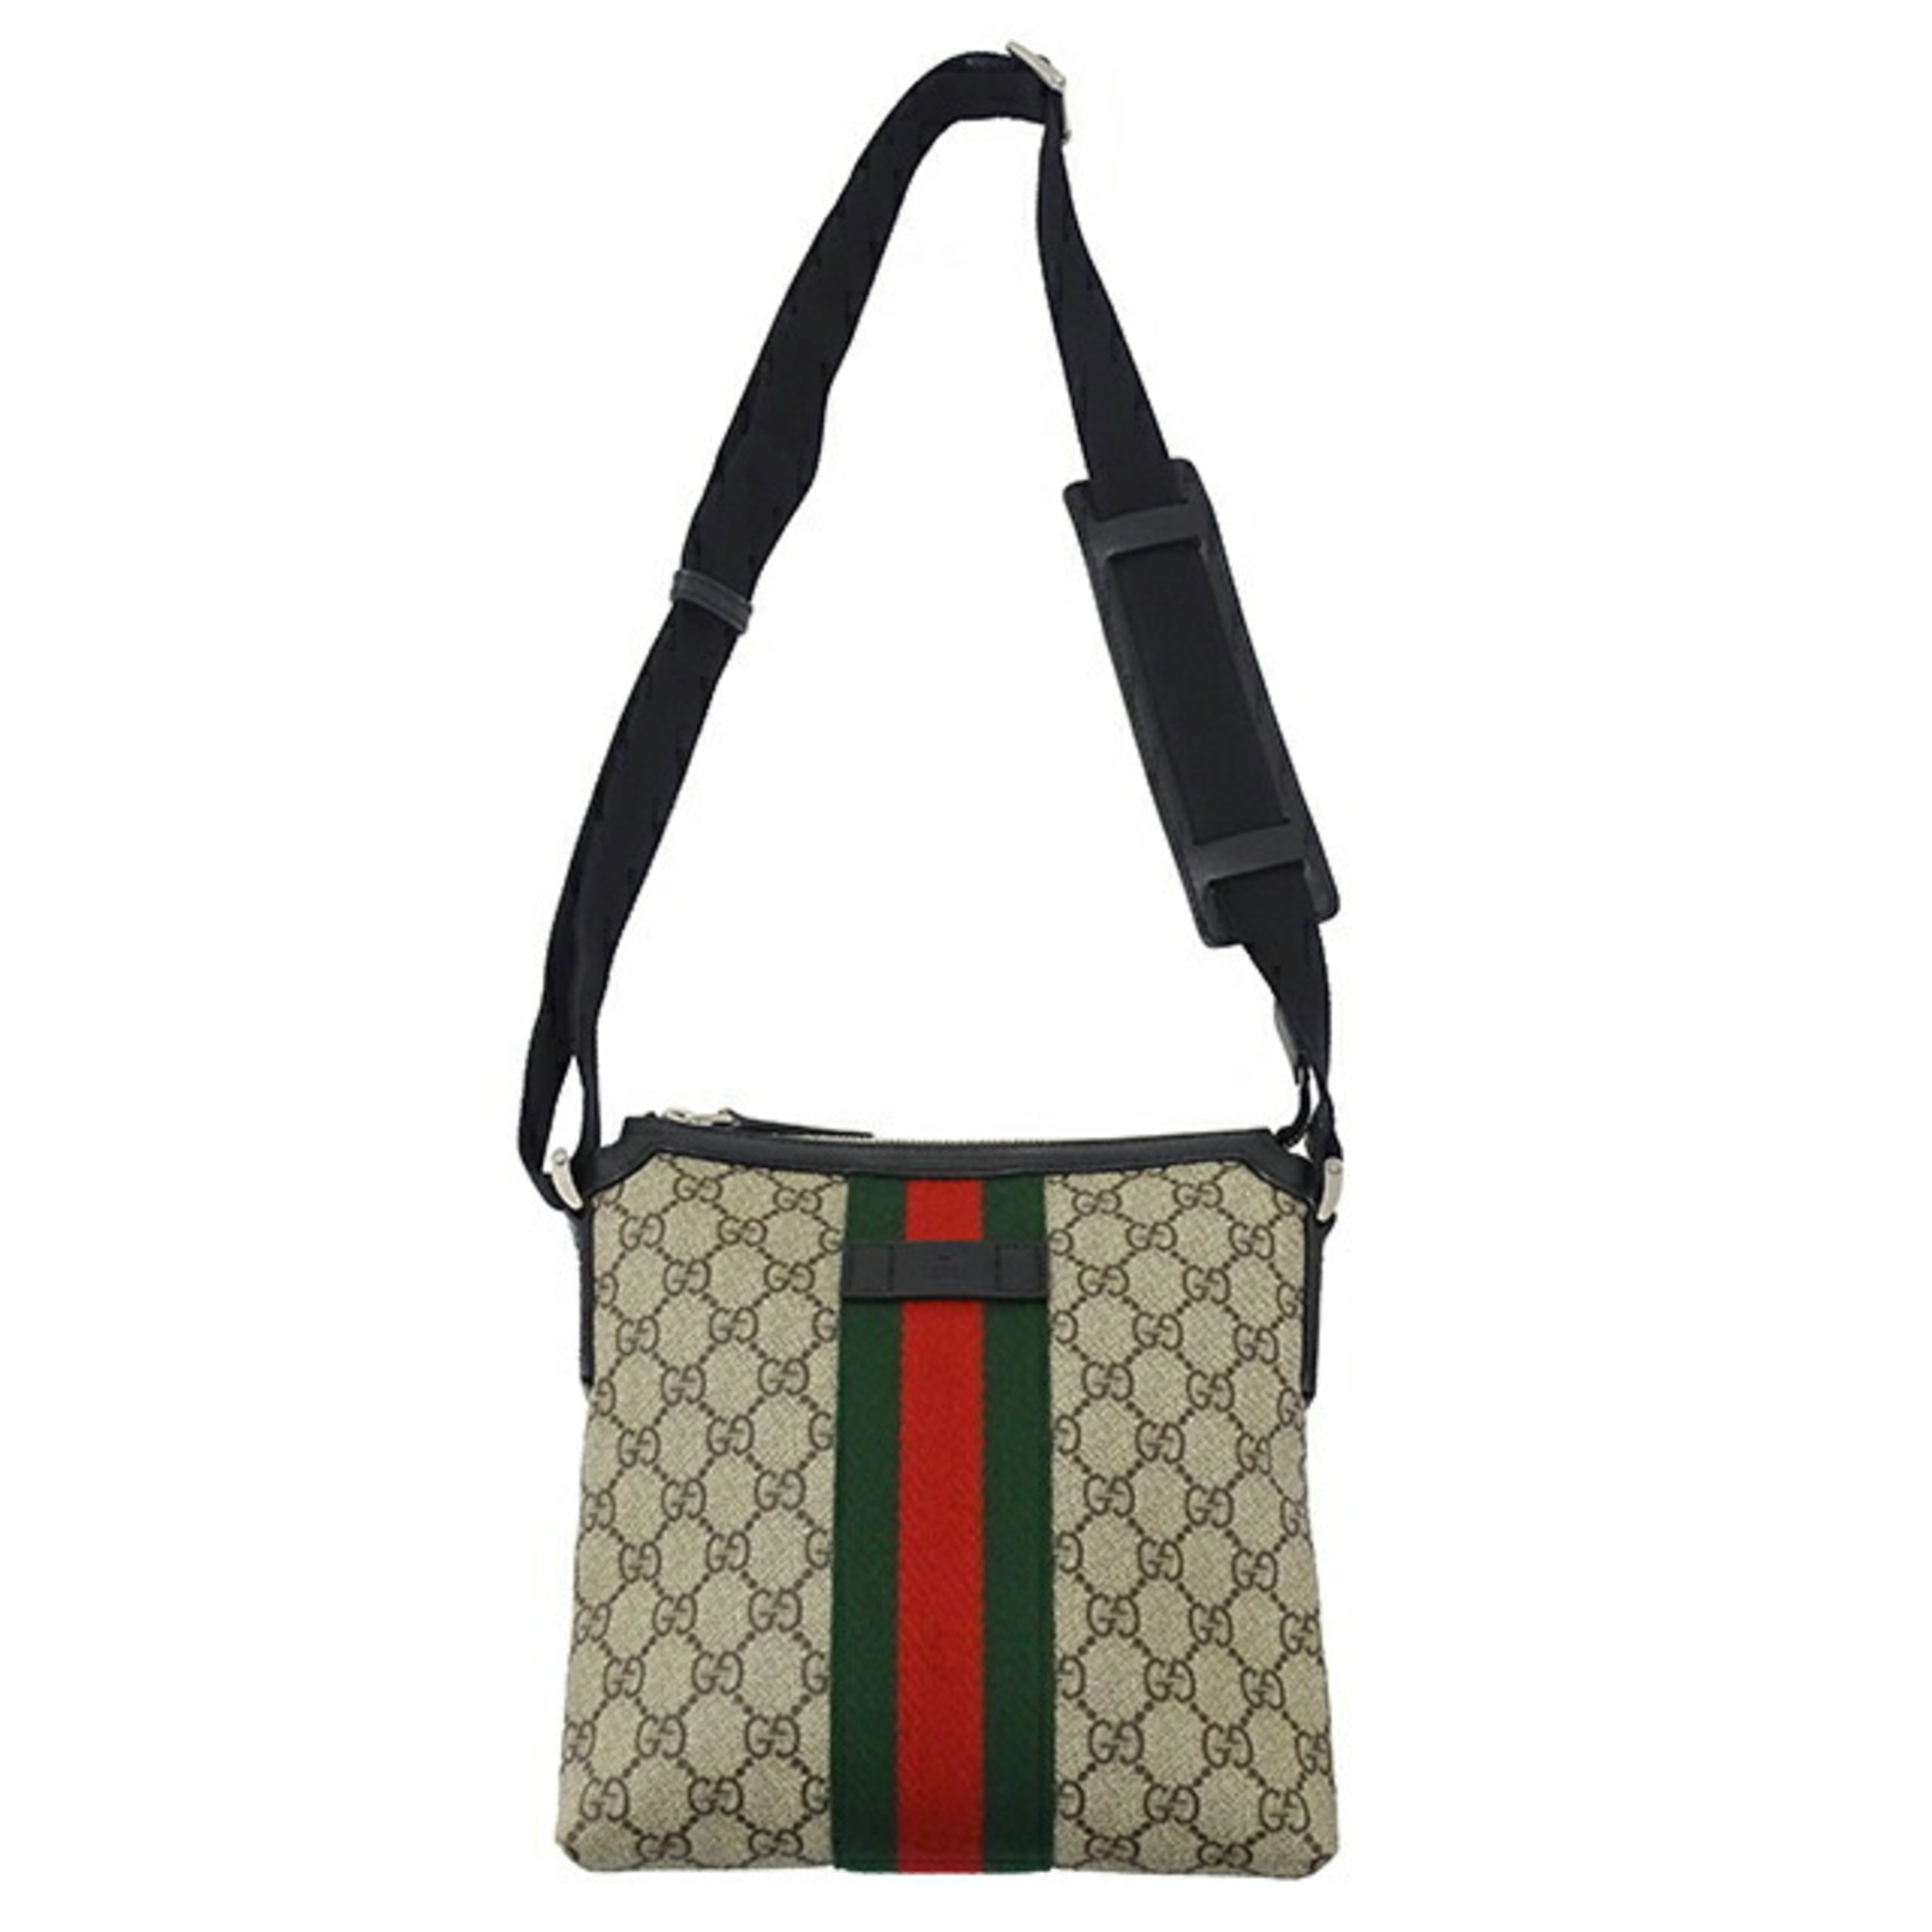 GUCCI Bags for Women and Men GG Supreme Shelly Shoulder Bag 471454 Compact Black